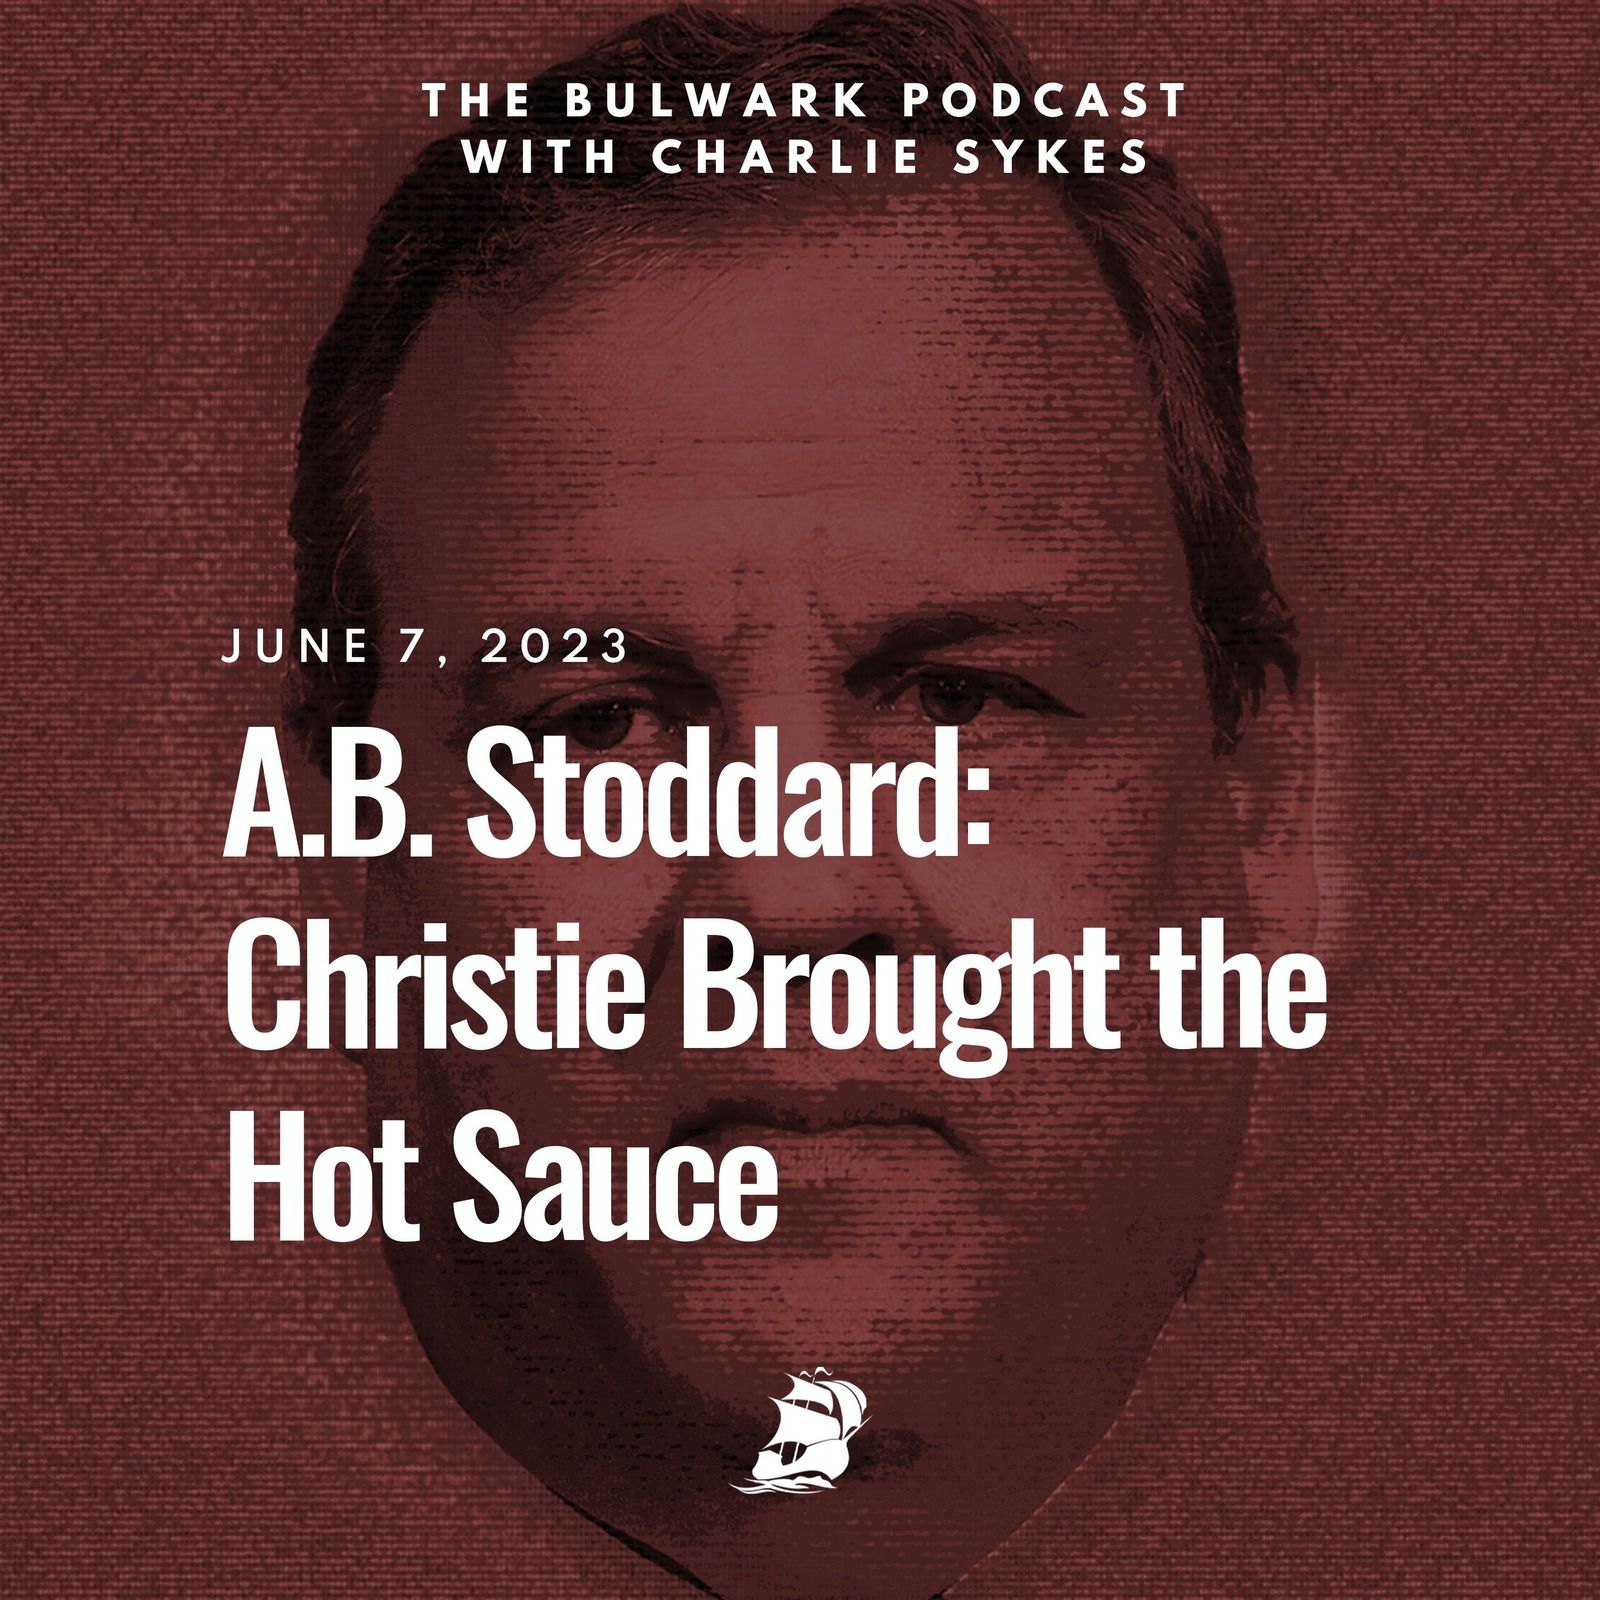 A.B. Stoddard: Christie Brought the Hot Sauce